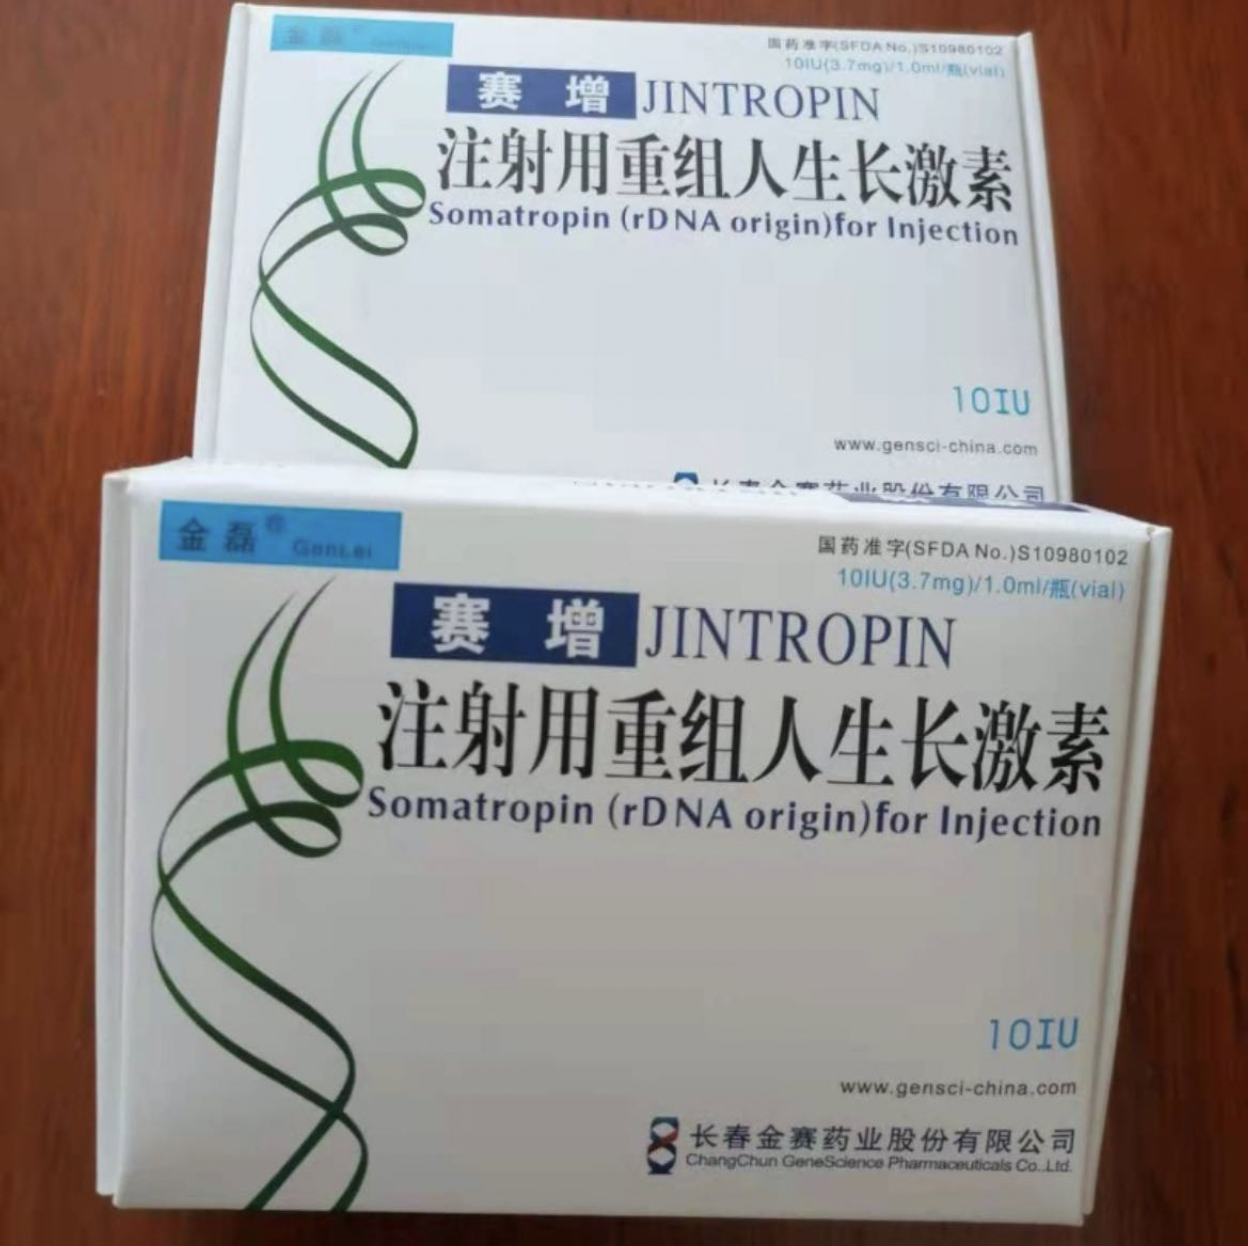 Recombinant Human Growth Hormone for Injection